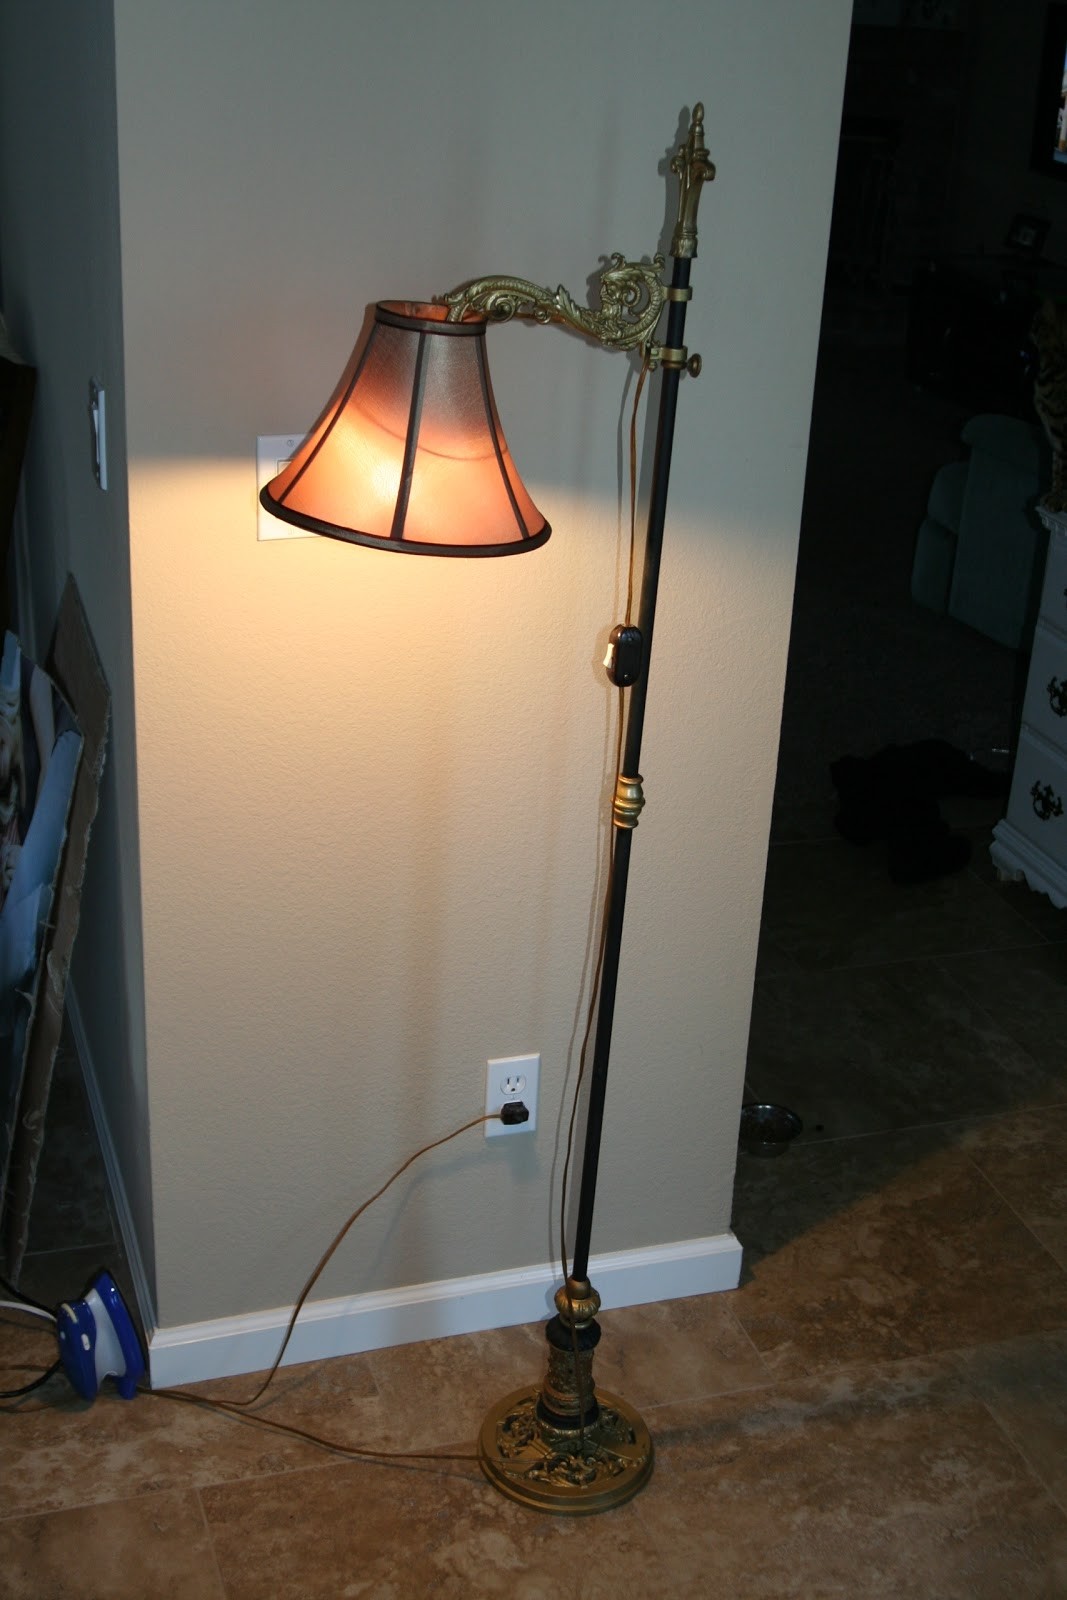 Description this vintage antique floor lamp is solid iron and